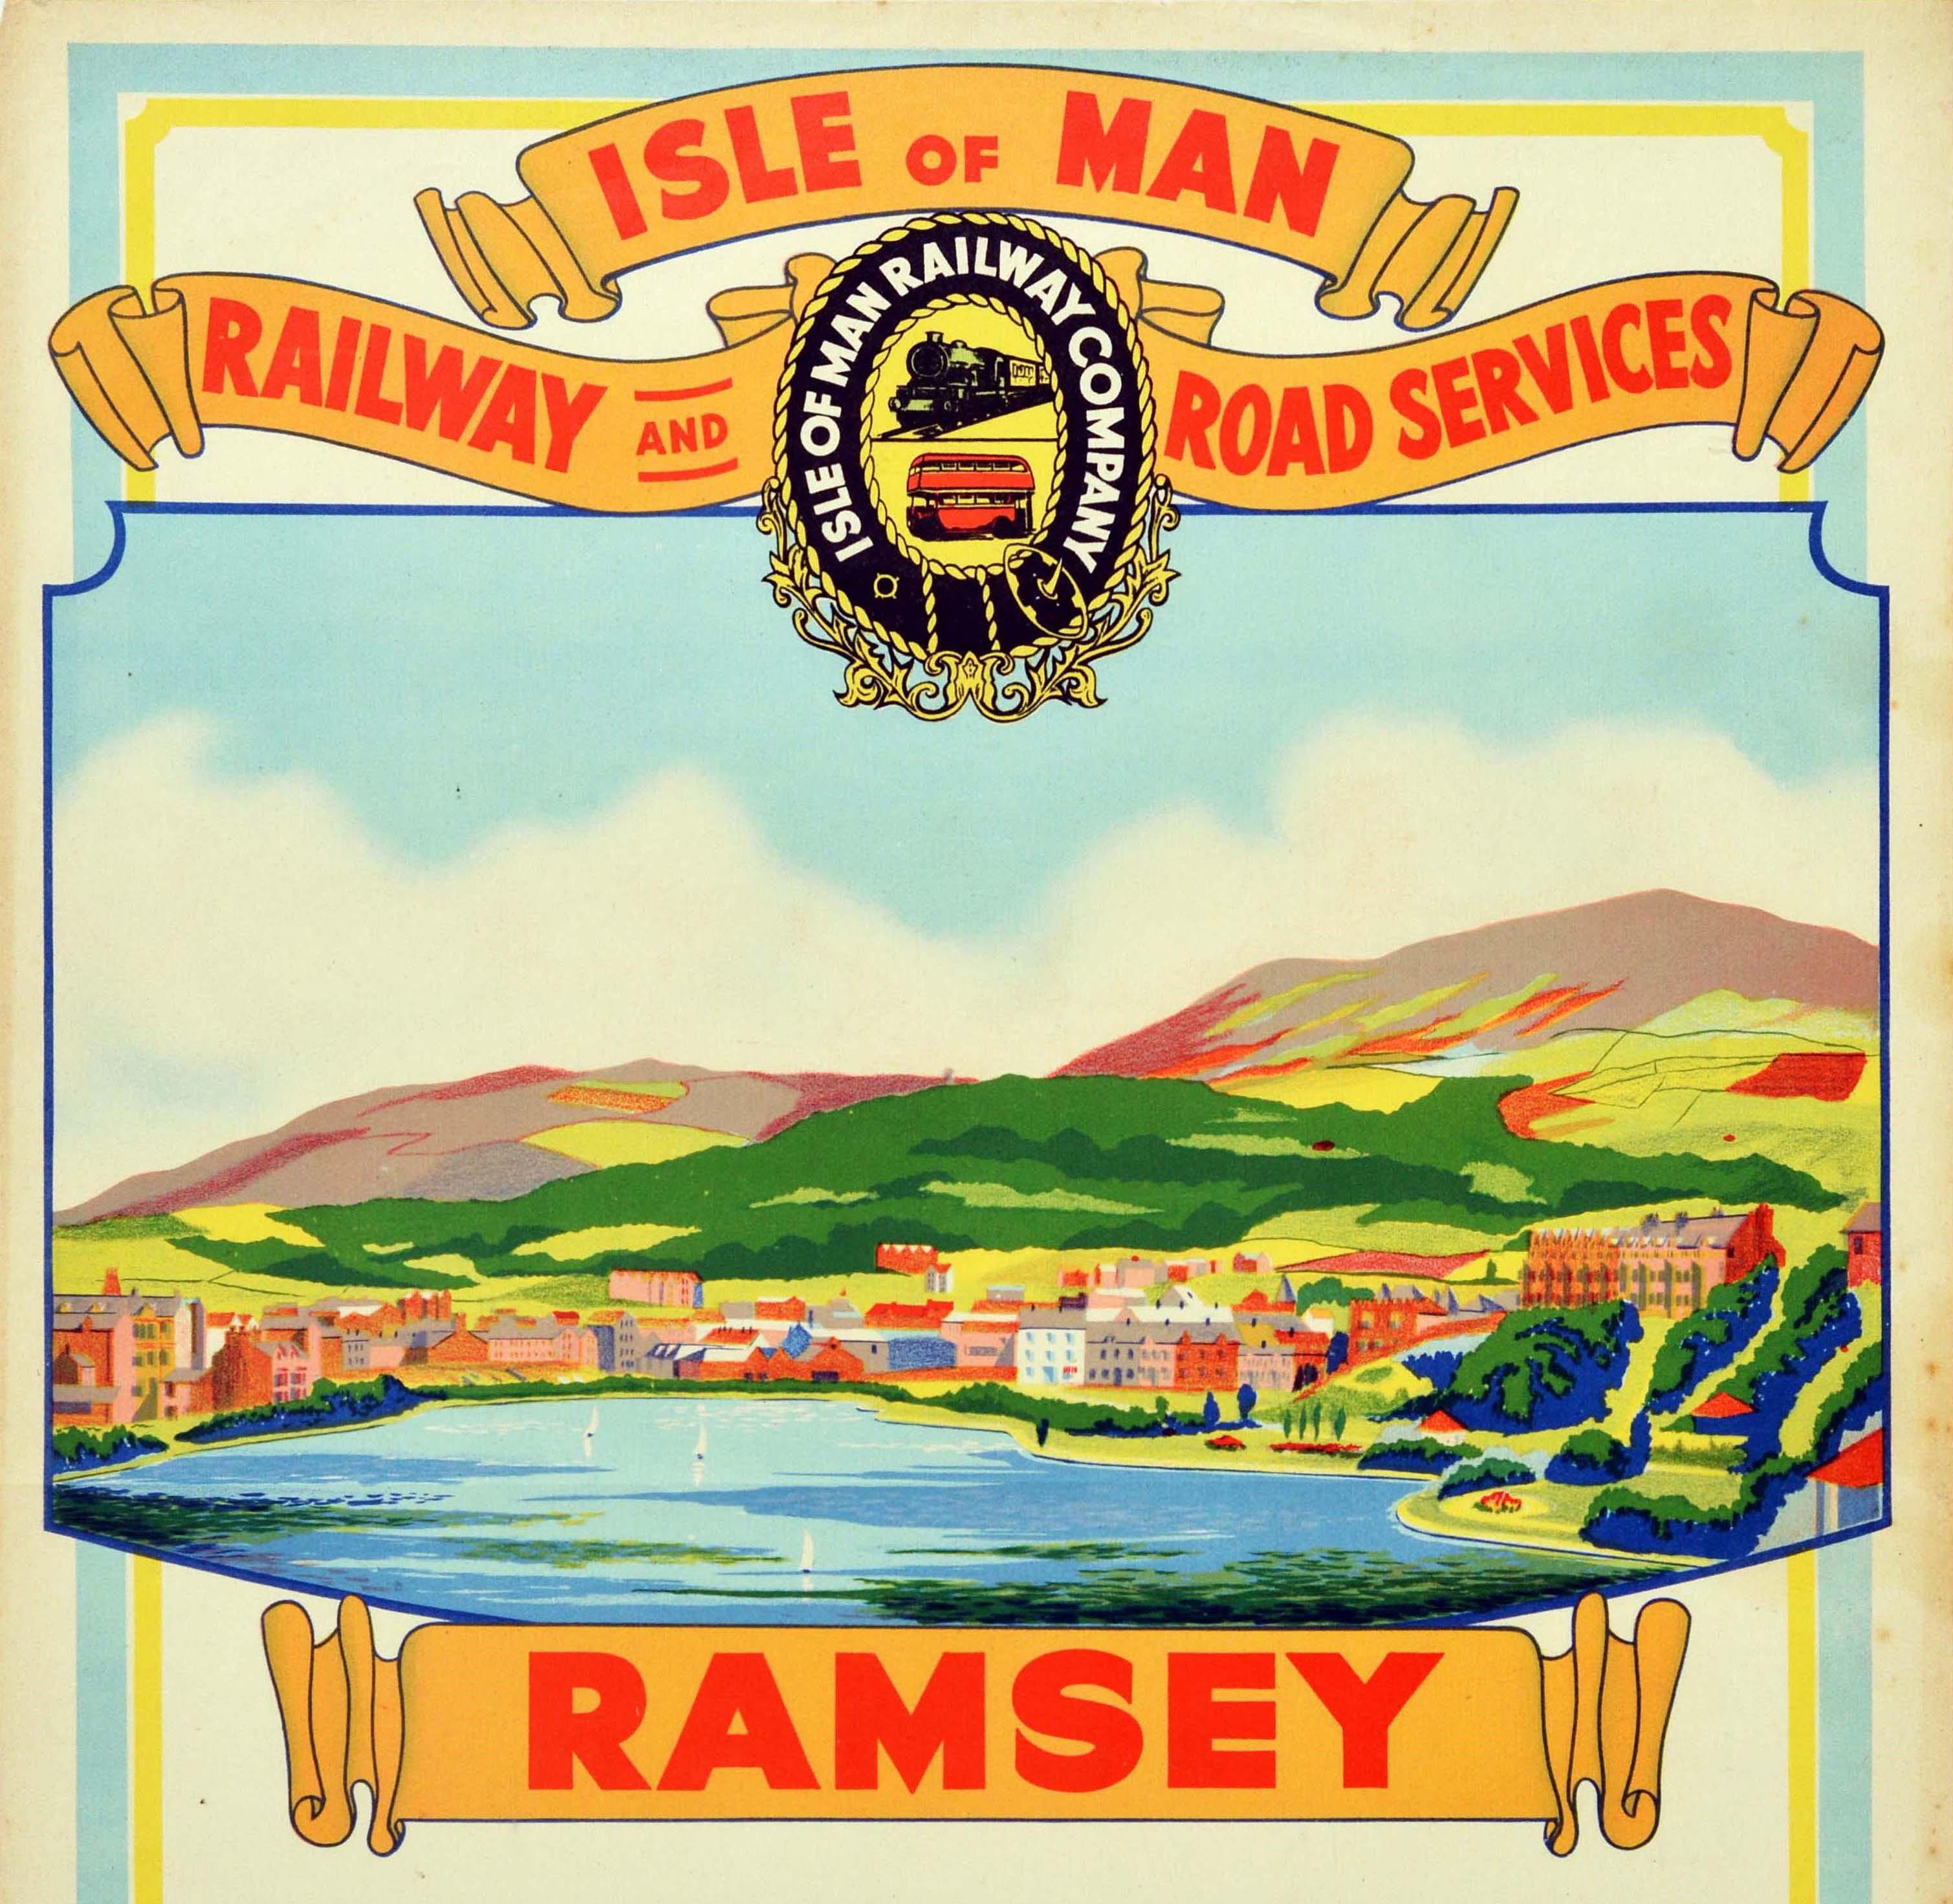 Original vintage travel advertising poster published by the Isle of Man Railway Company (founded 1870) to promote its train and bus services to the coastal town of Ramsey in the north of the island featuring a colourful scenic view of the town with